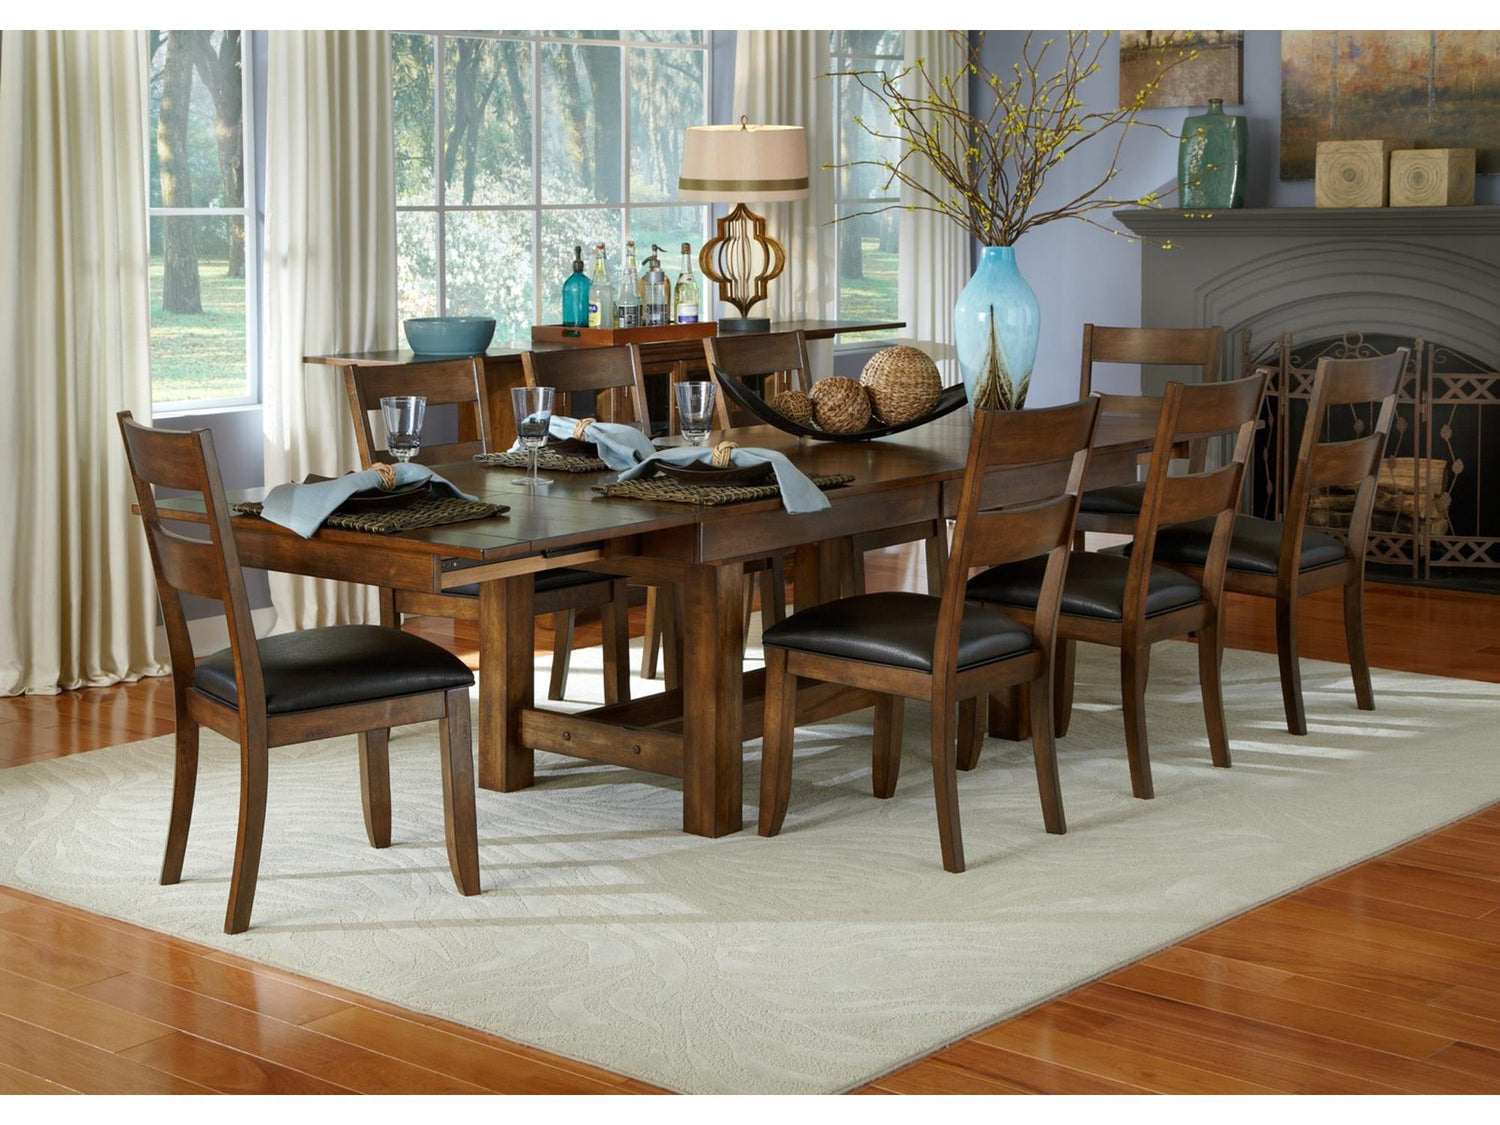 Mariposa Trestle Table Dining Furniture In Vancouver Wa